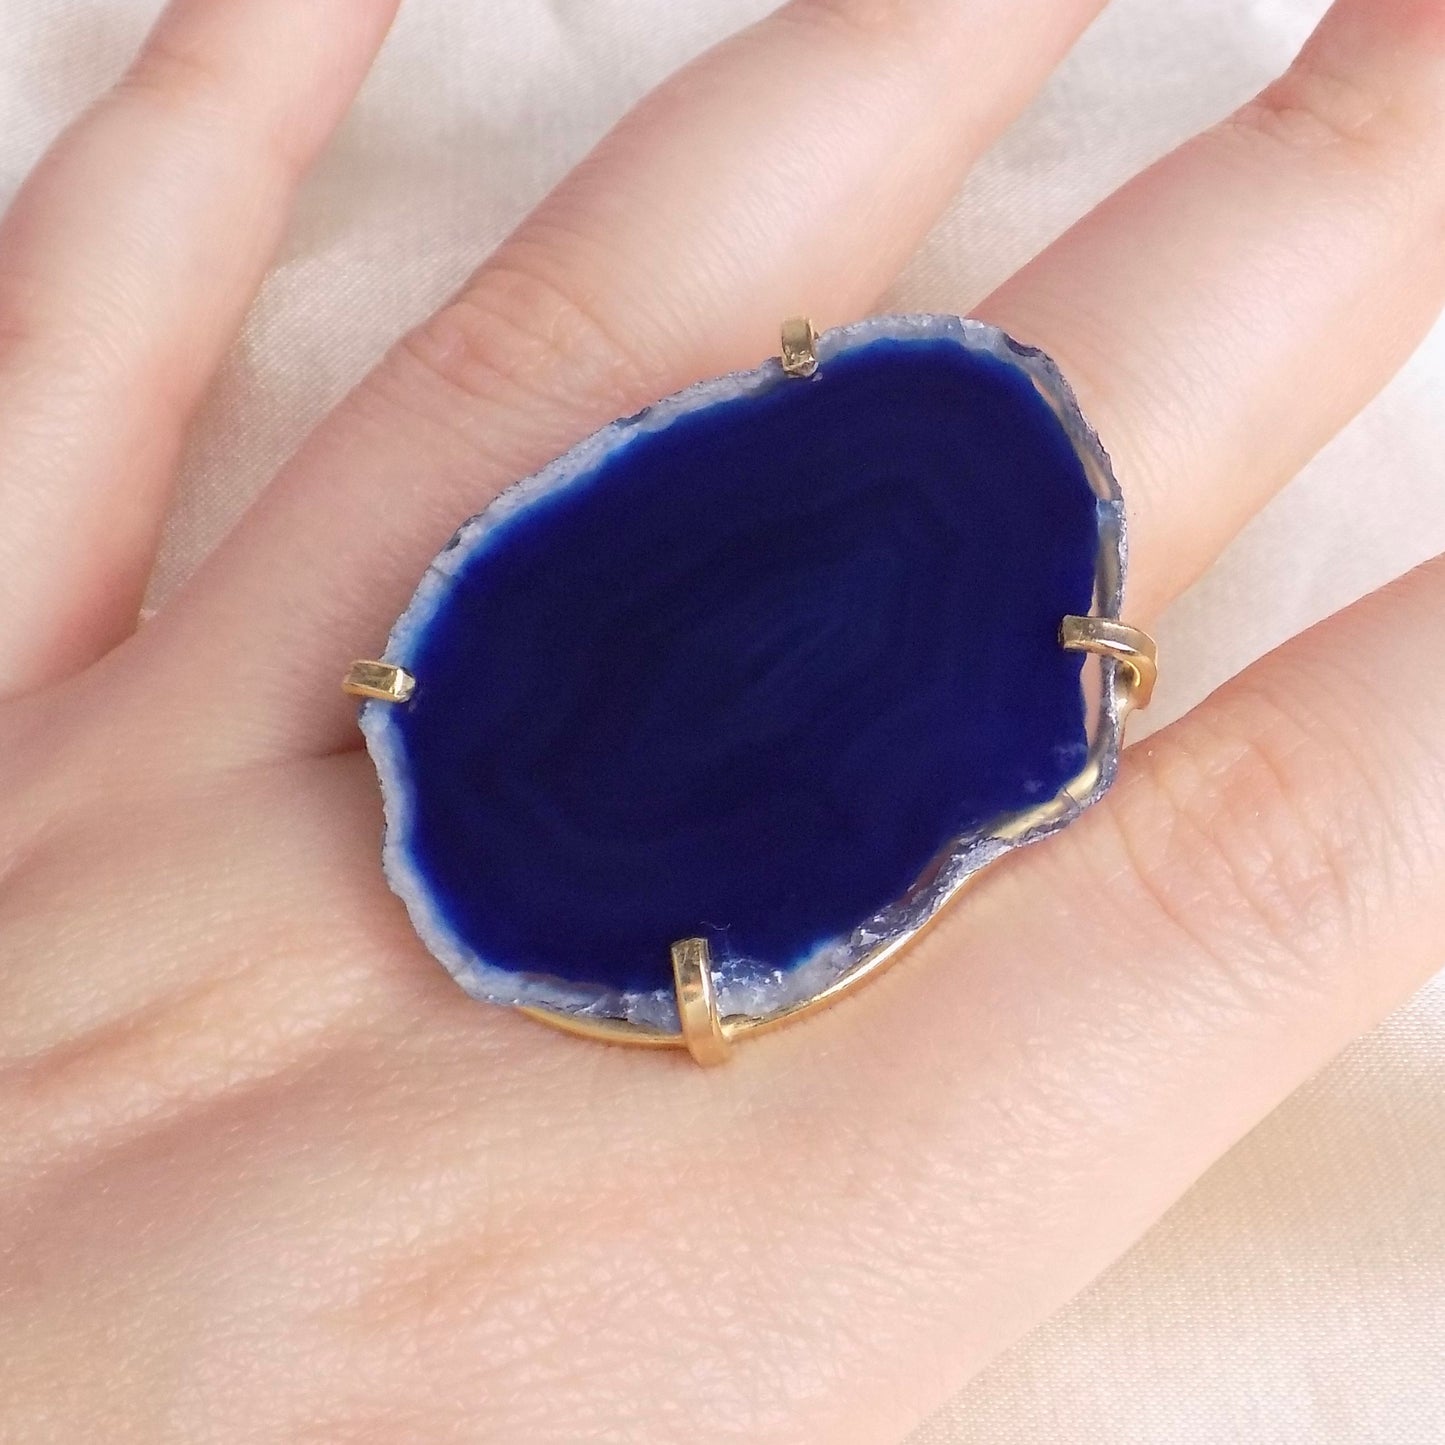 Blue Agate Ring - Sliced Agate Geode Ring